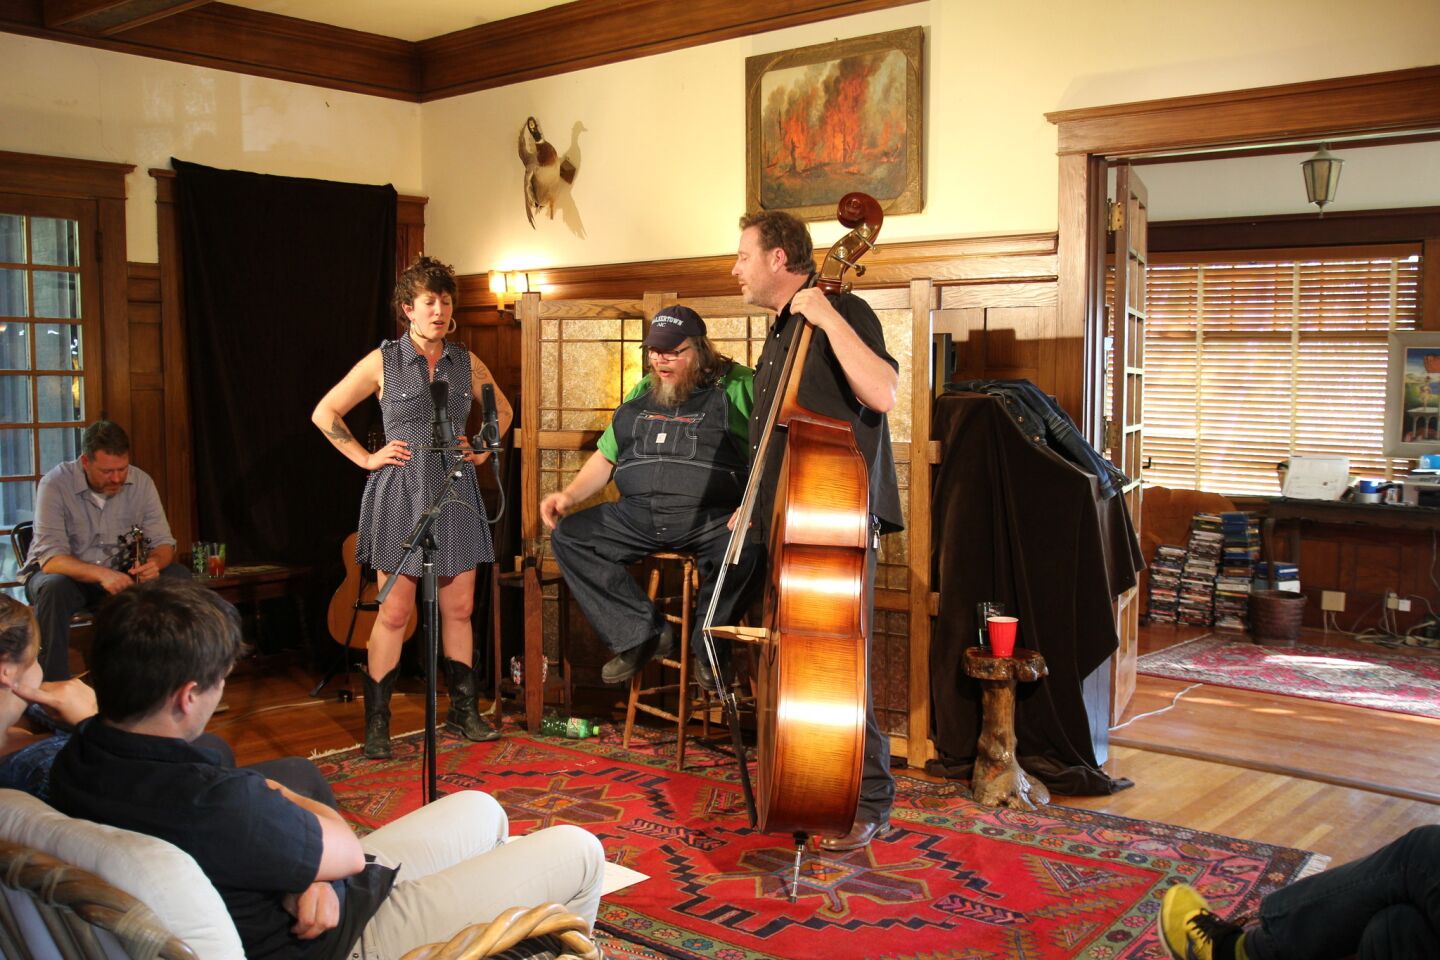 The show in early May brought together musicians from around the country. Performers from left: Sabra Guzman, Riley Baugus and Travis Stuart. Stuart often plays with his brother Trevor, who can be seen seated at far left.